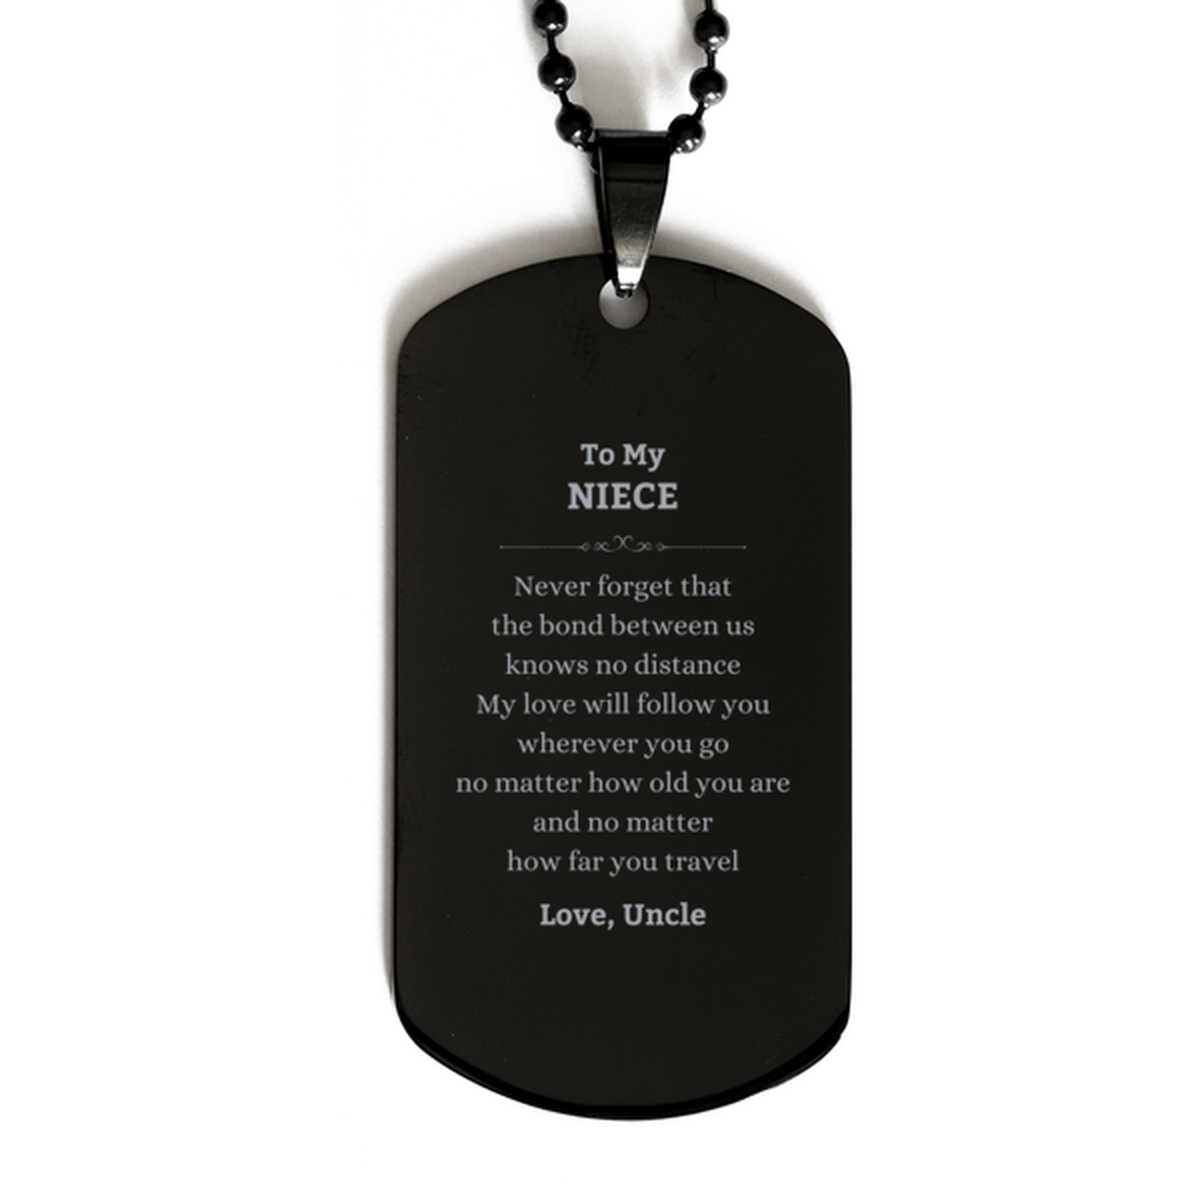 Niece Birthday Gifts from Uncle, Adjustable Black Dog Tag for Niece Christmas Graduation Unique Gifts Niece Never forget that the bond between us knows no distance. Love, Uncle